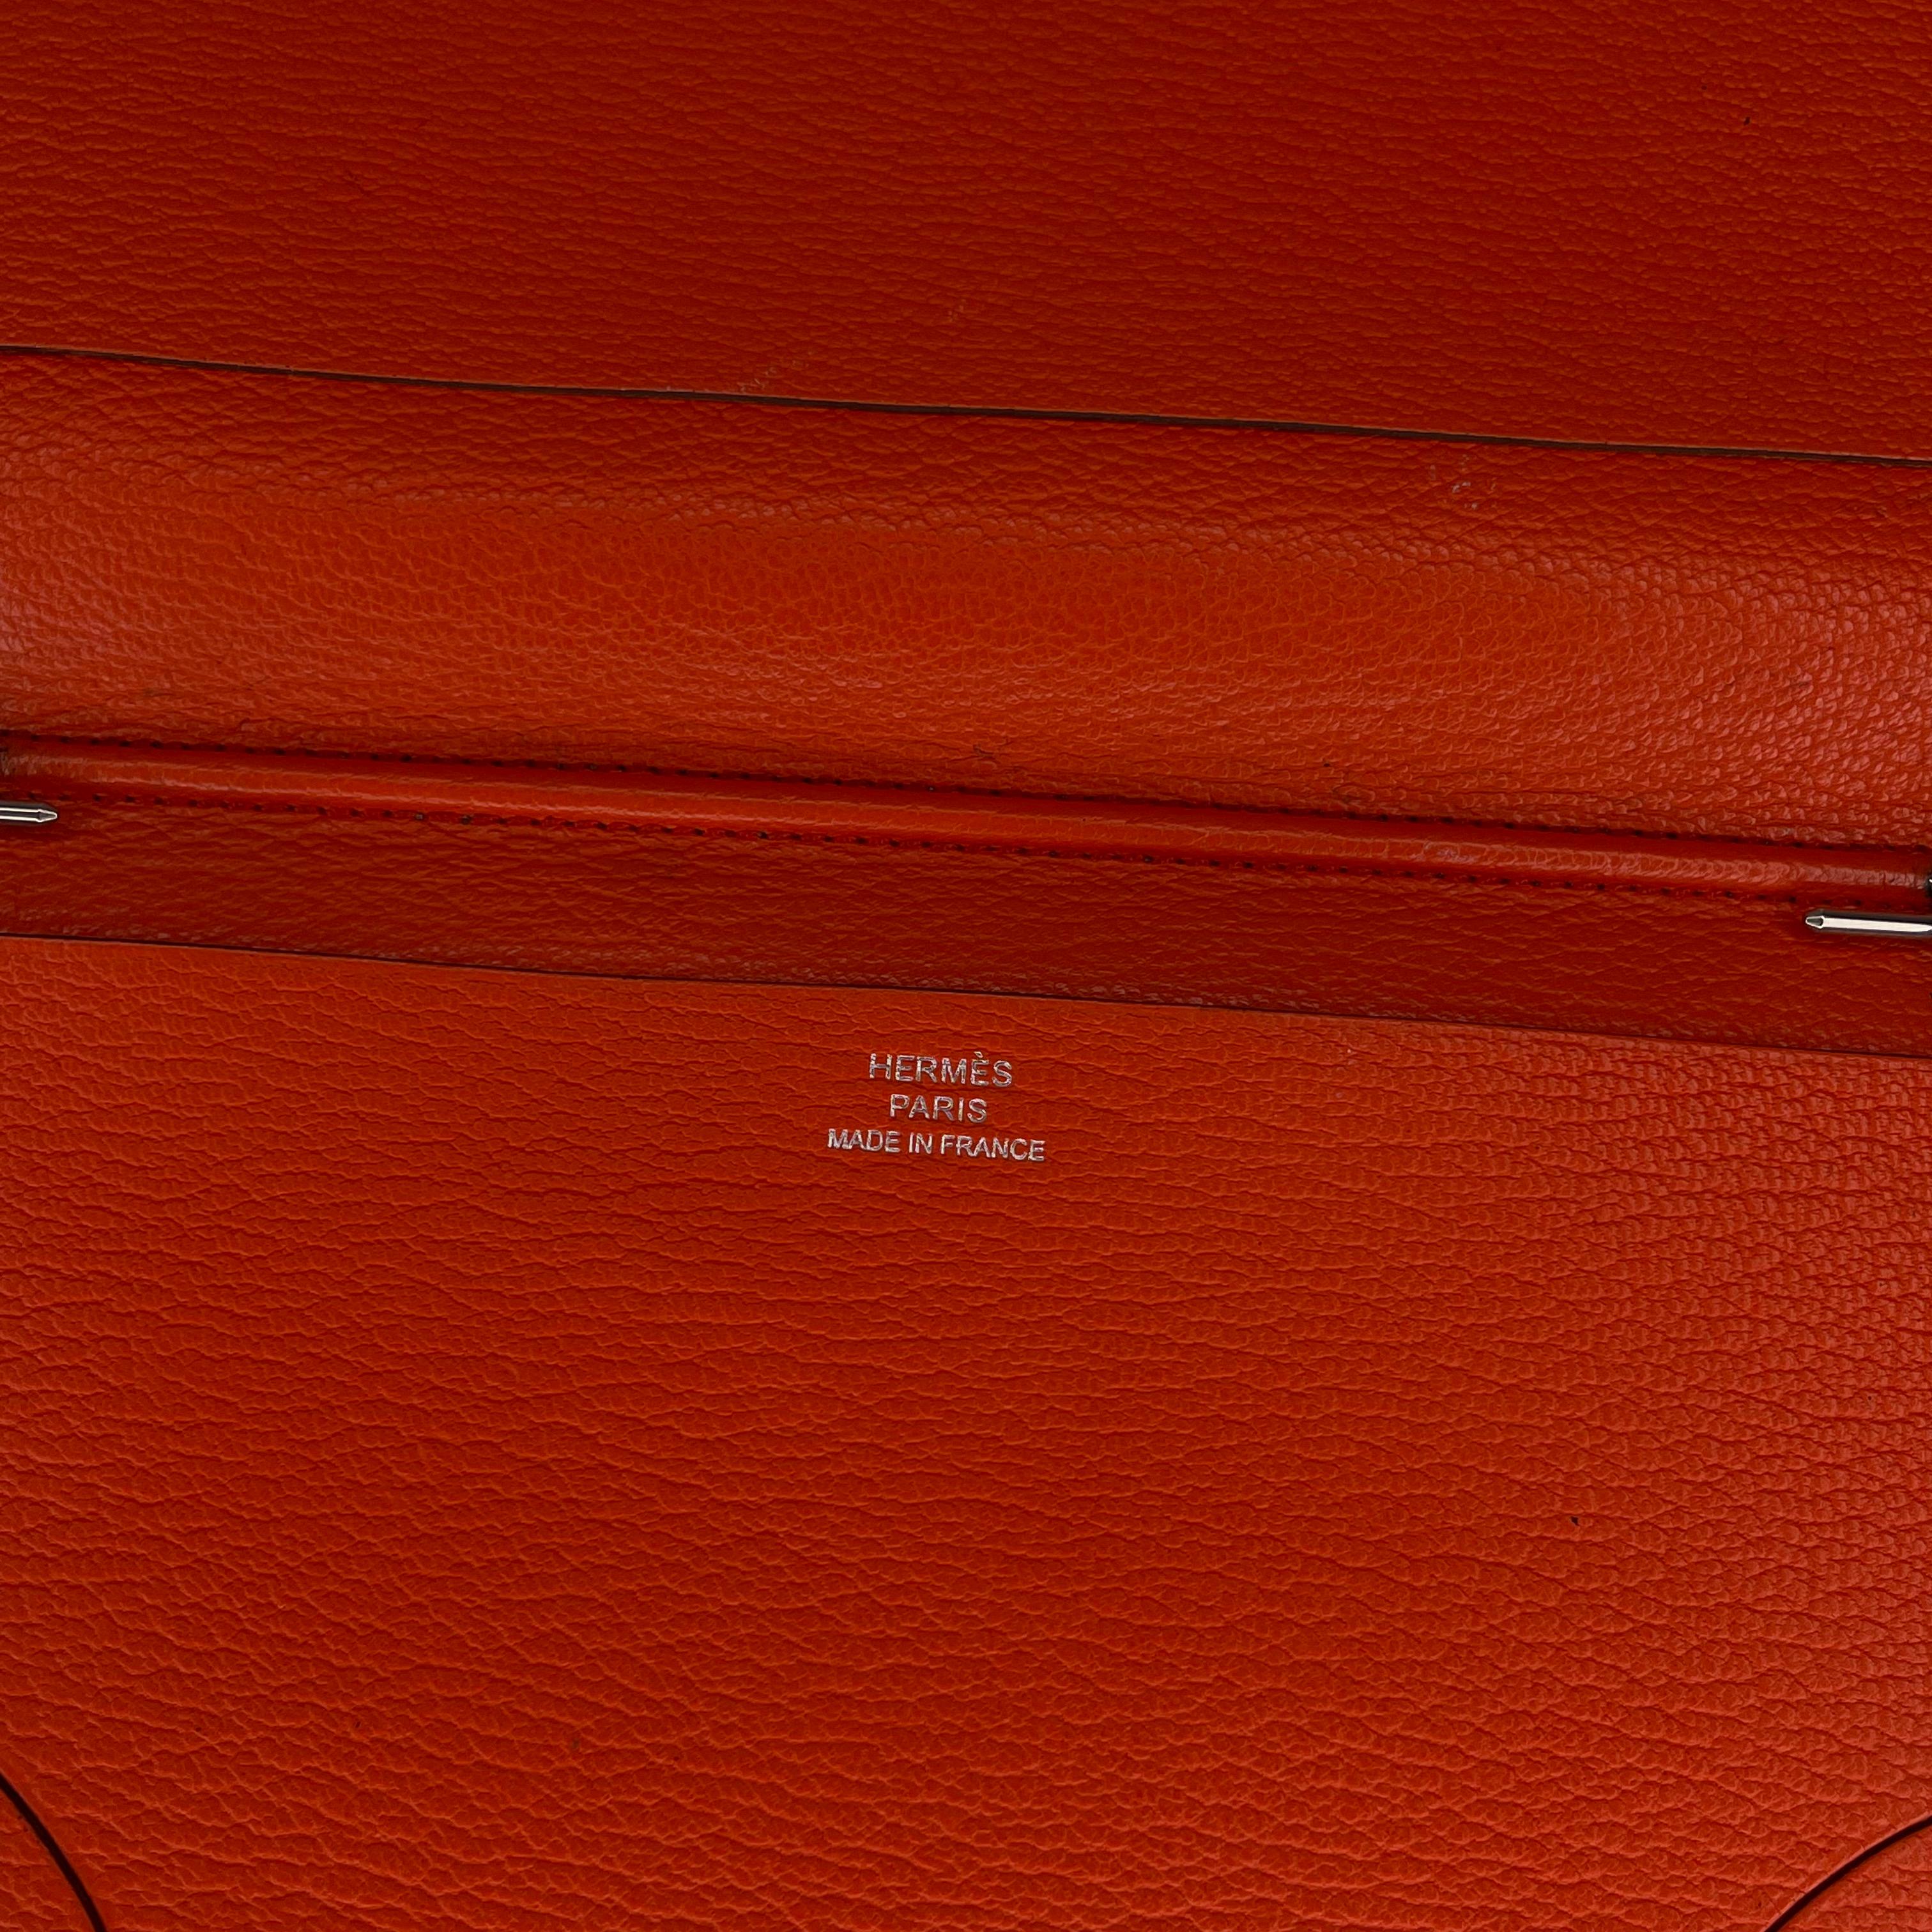 Hermes Orange Leather Planner Diary Agenda Cover In Fair Condition For Sale In Montreal, Quebec